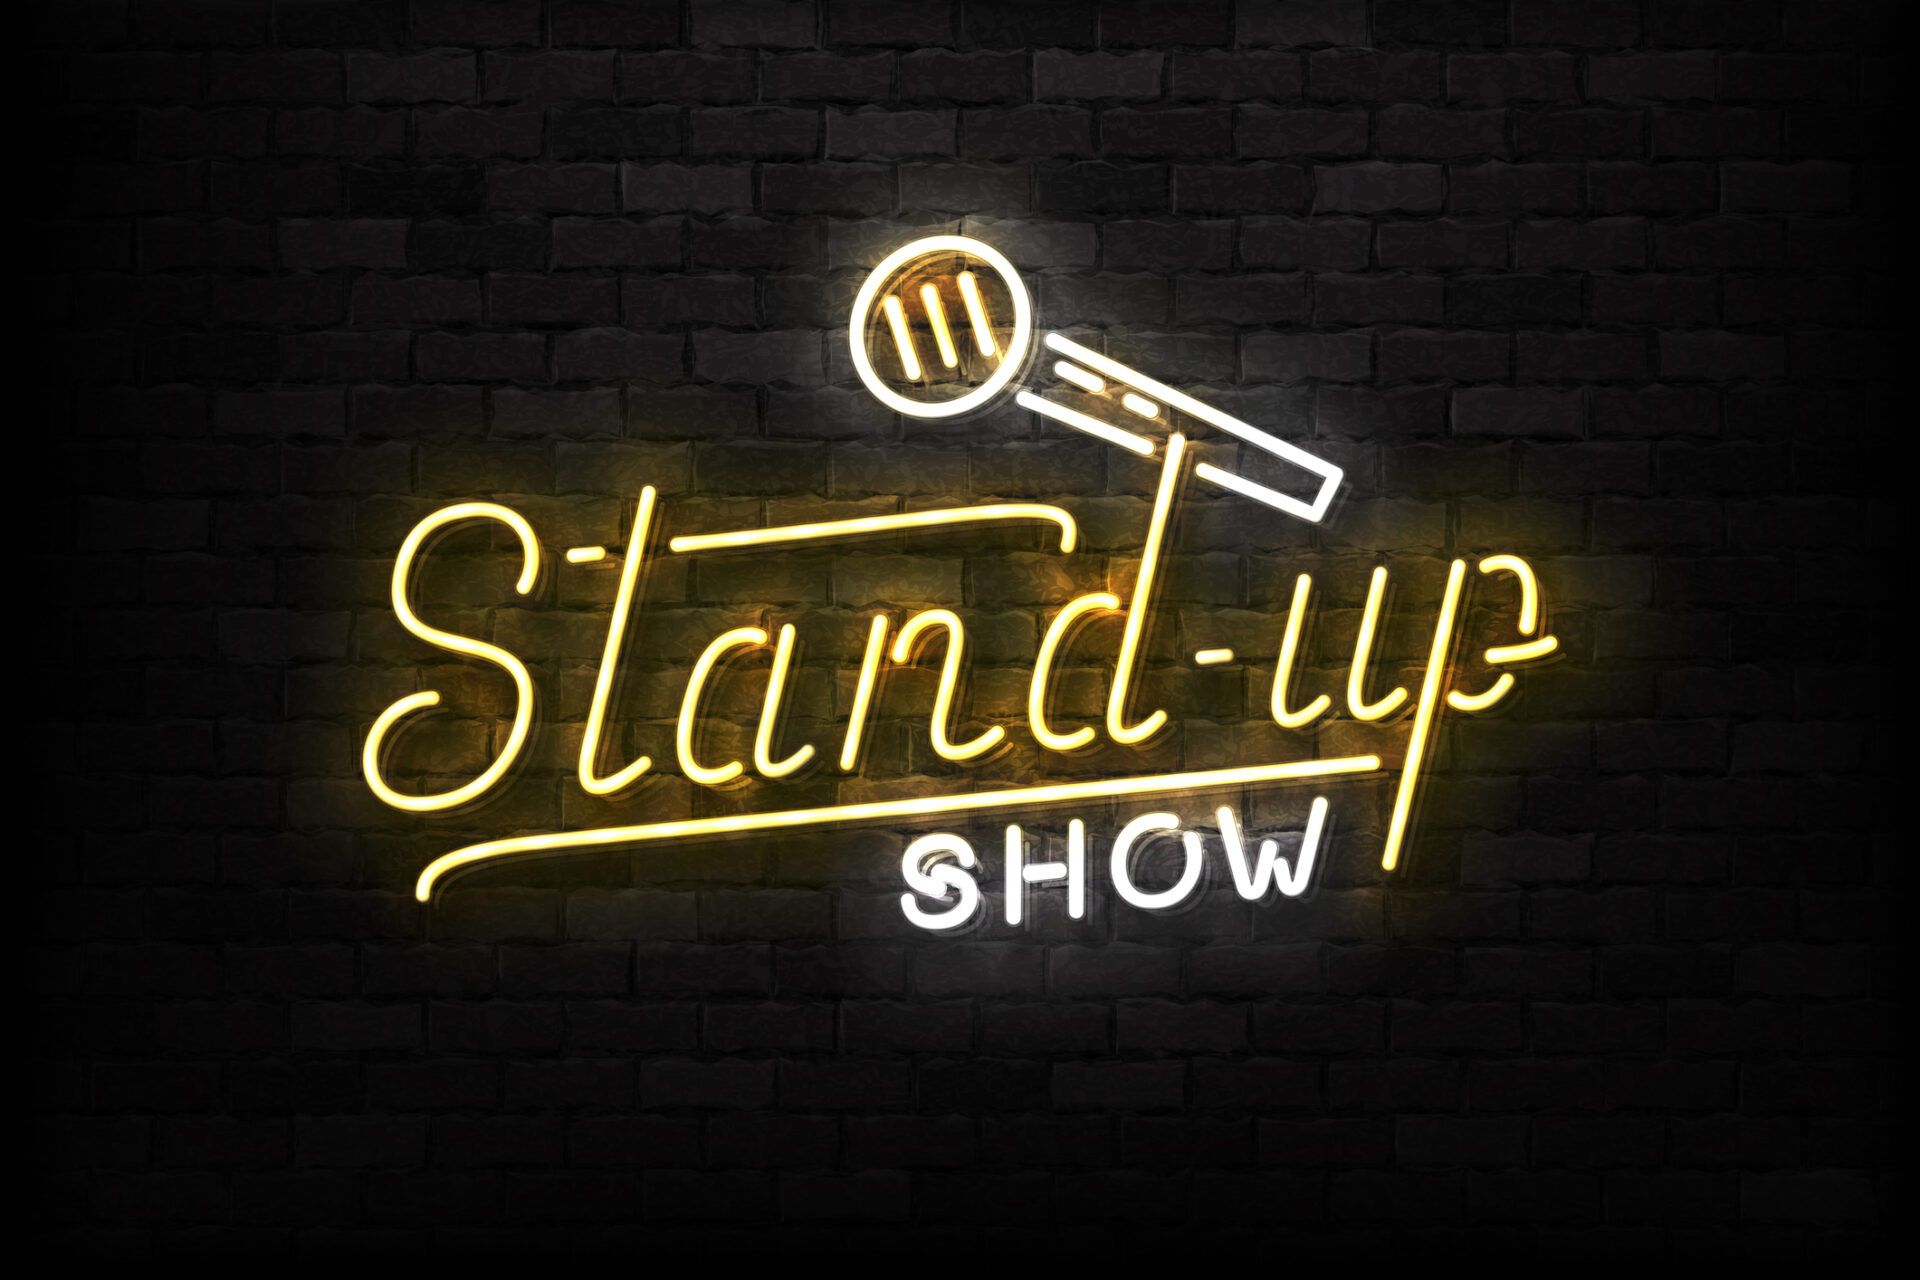 Stand-up comedy